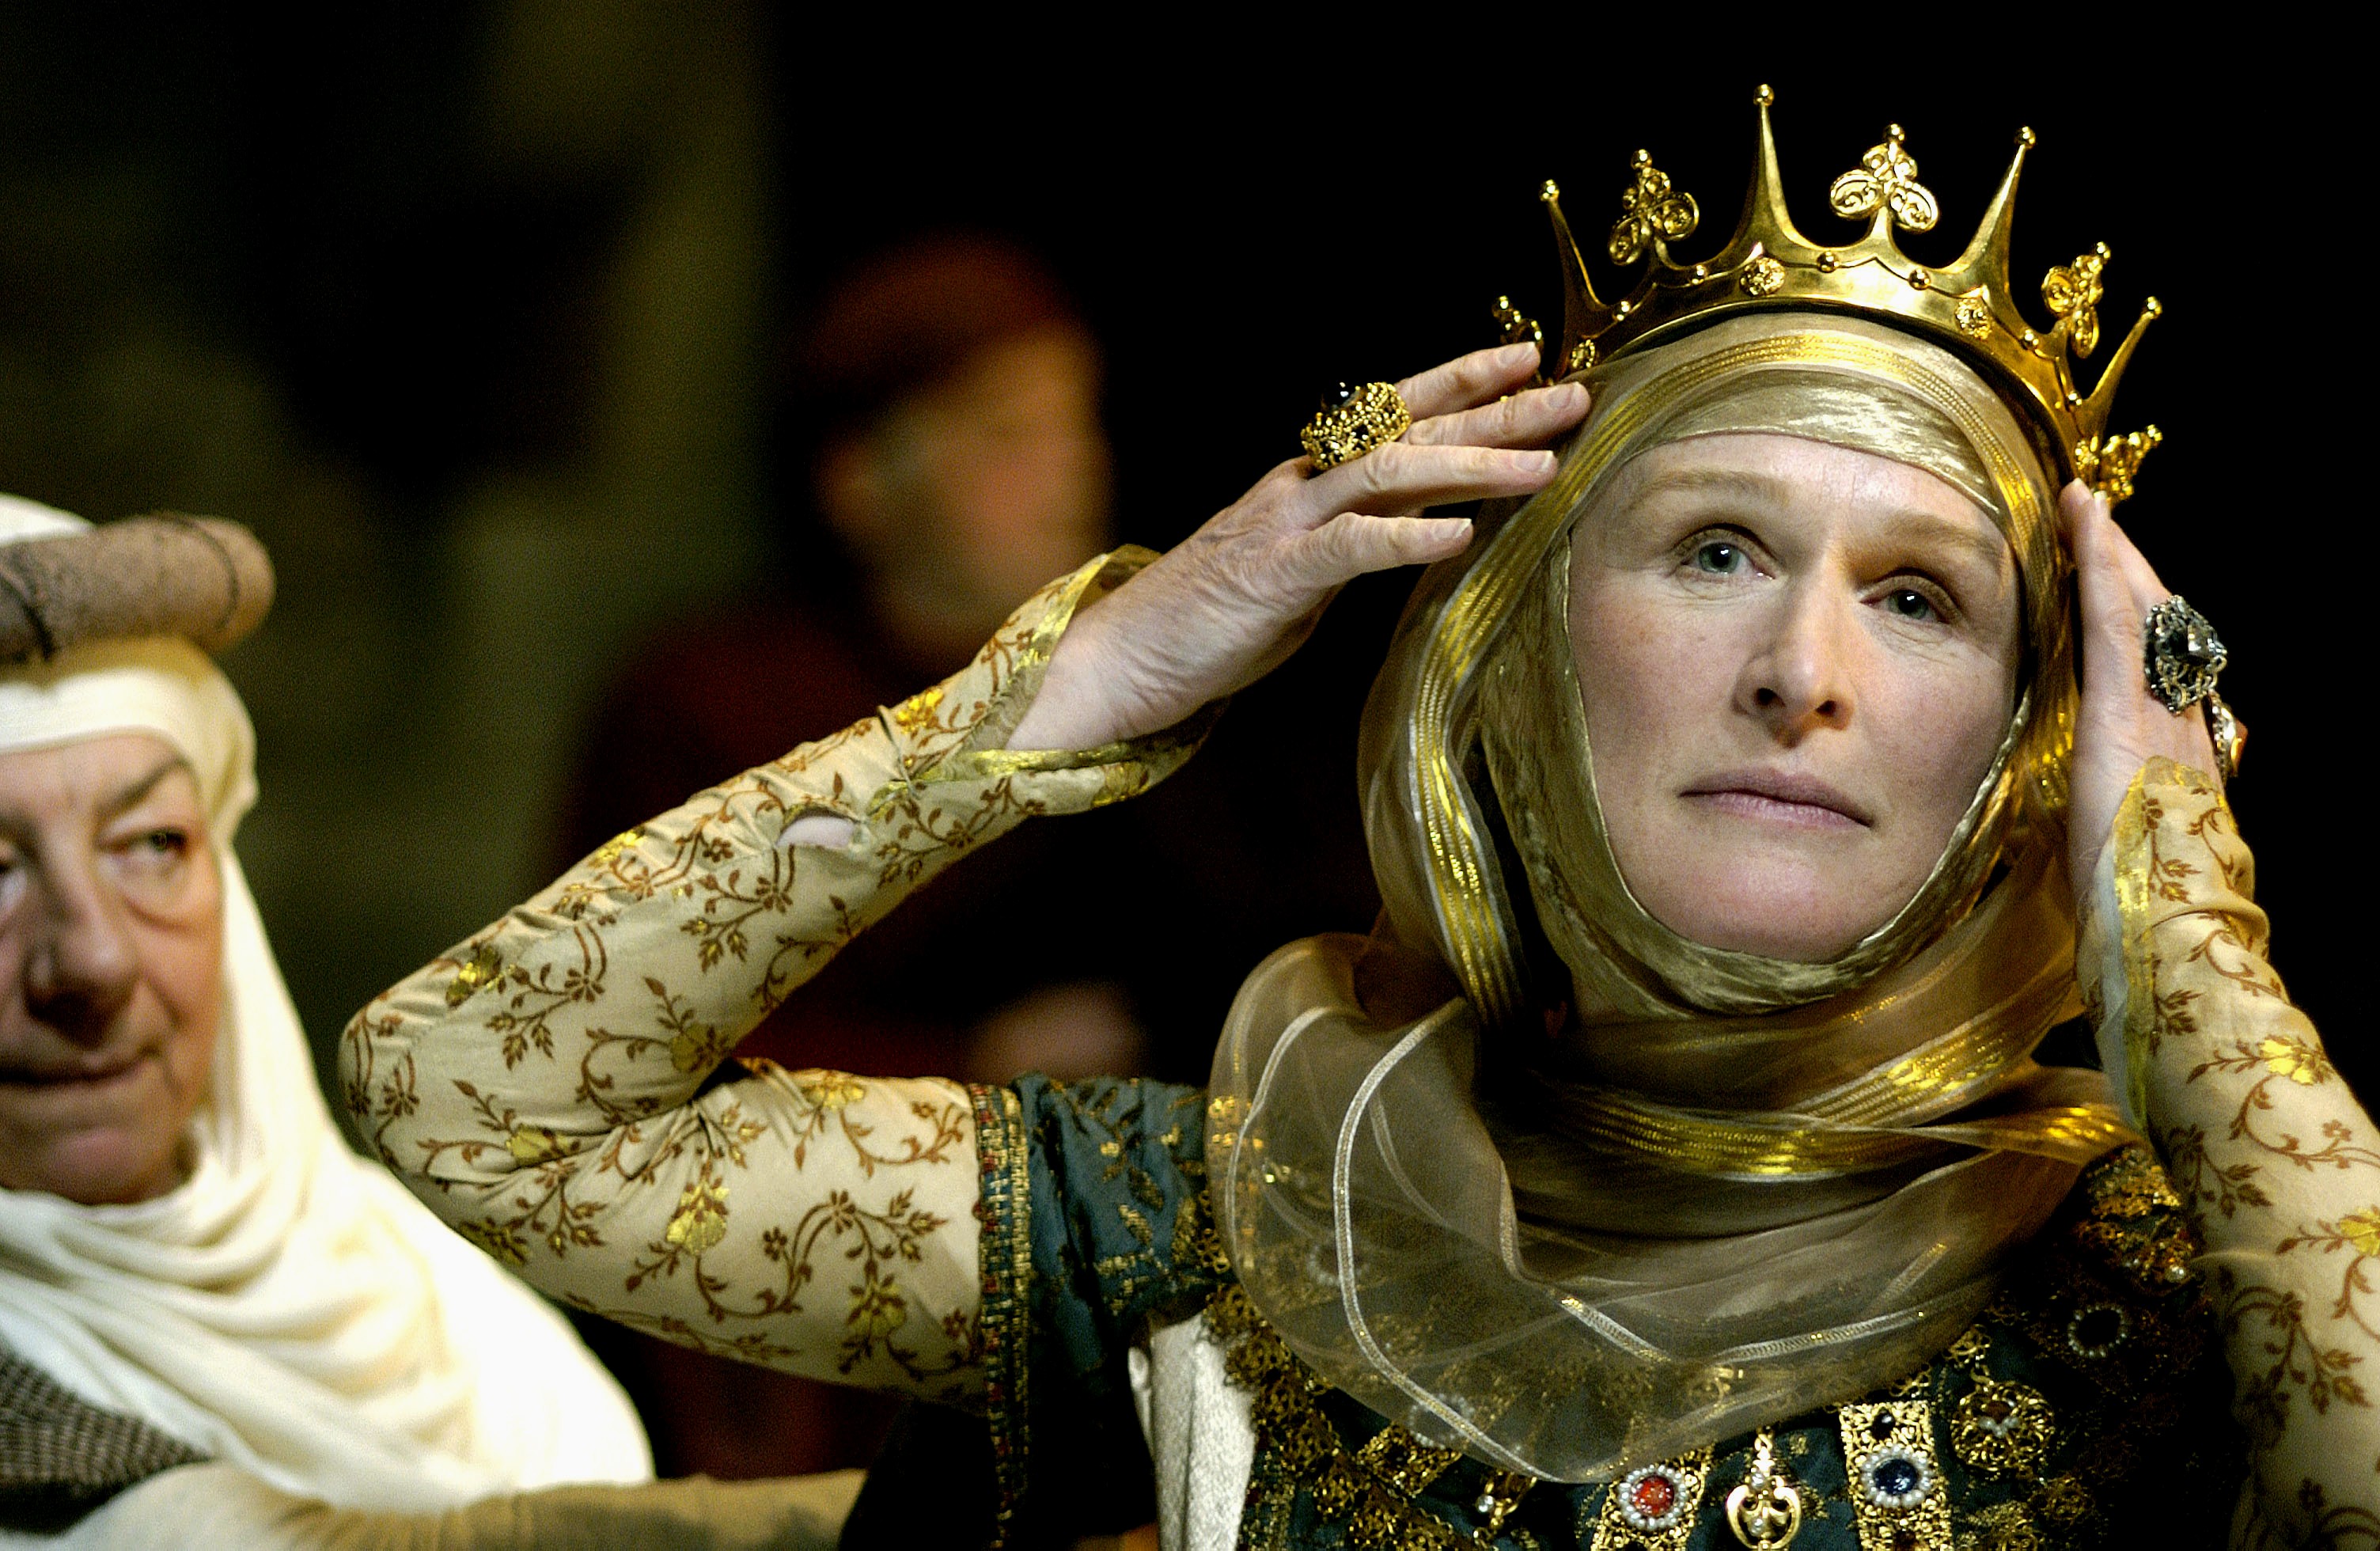 Glenn Close as Queen Eleanor of Aquitaine in the 2003 movie